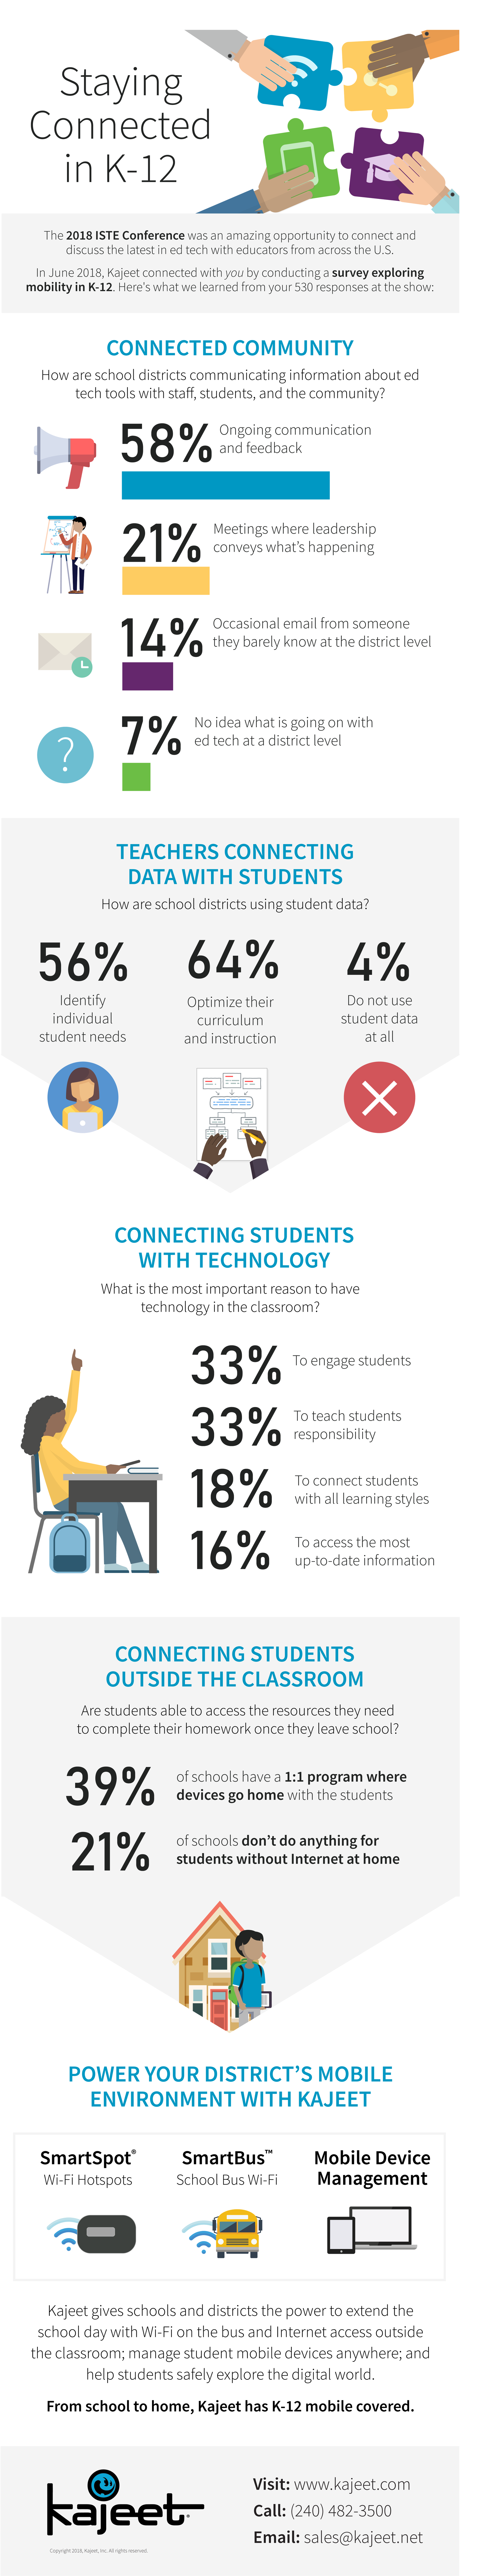 Staying Connected in K-12 (ISTE) Infographic